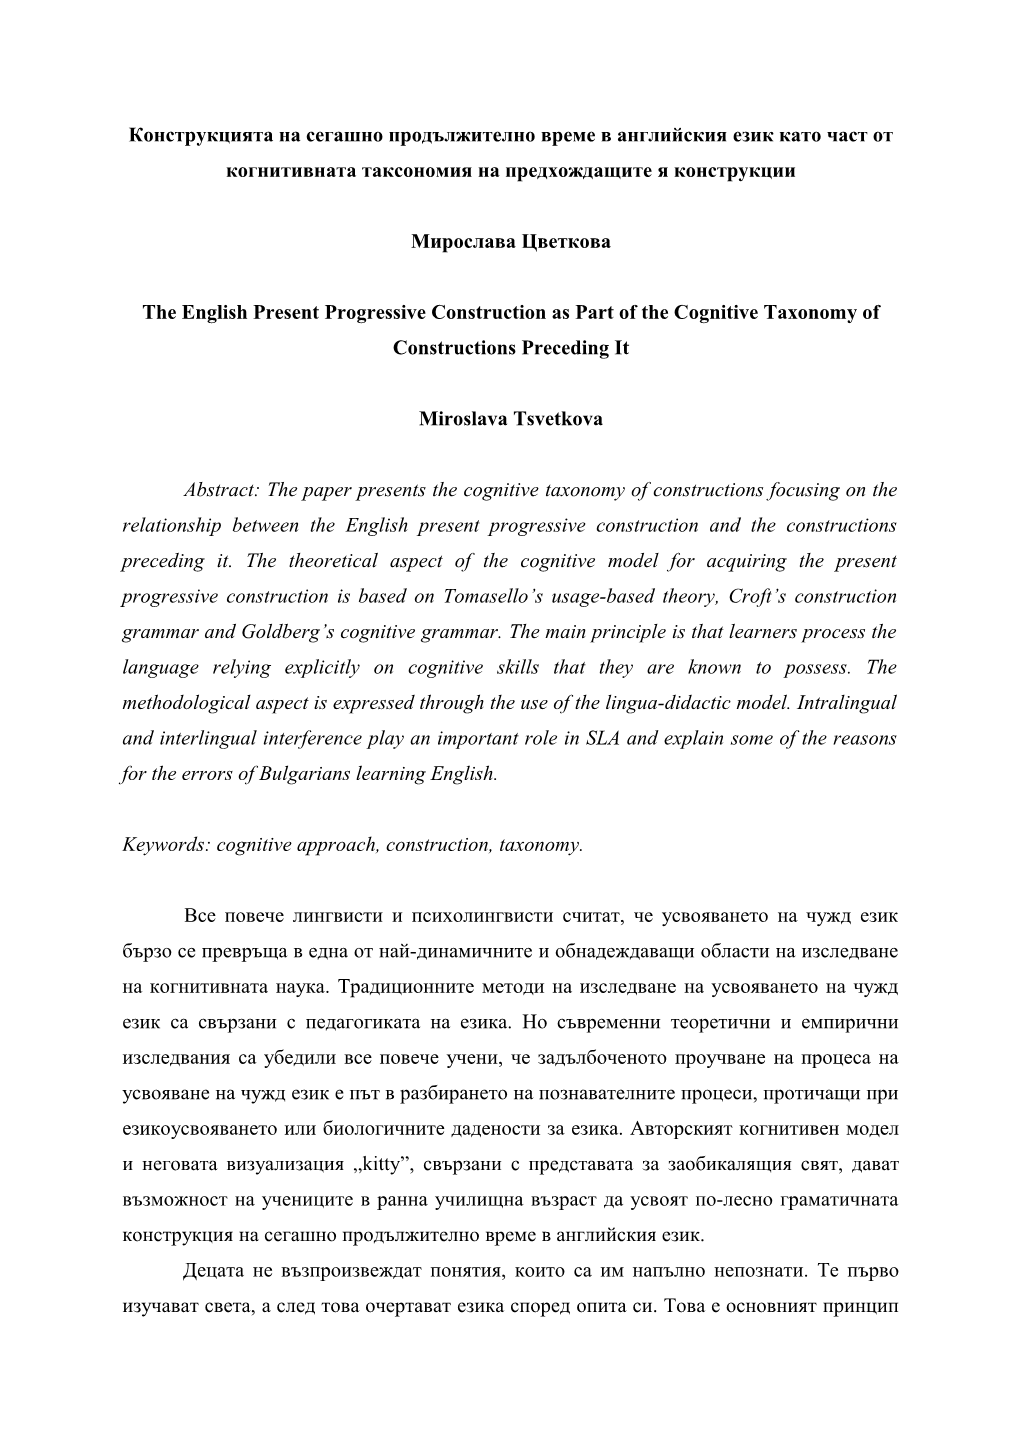 The English Present Progressive Construction As Part of the Cognitive Taxonomy of Constructions